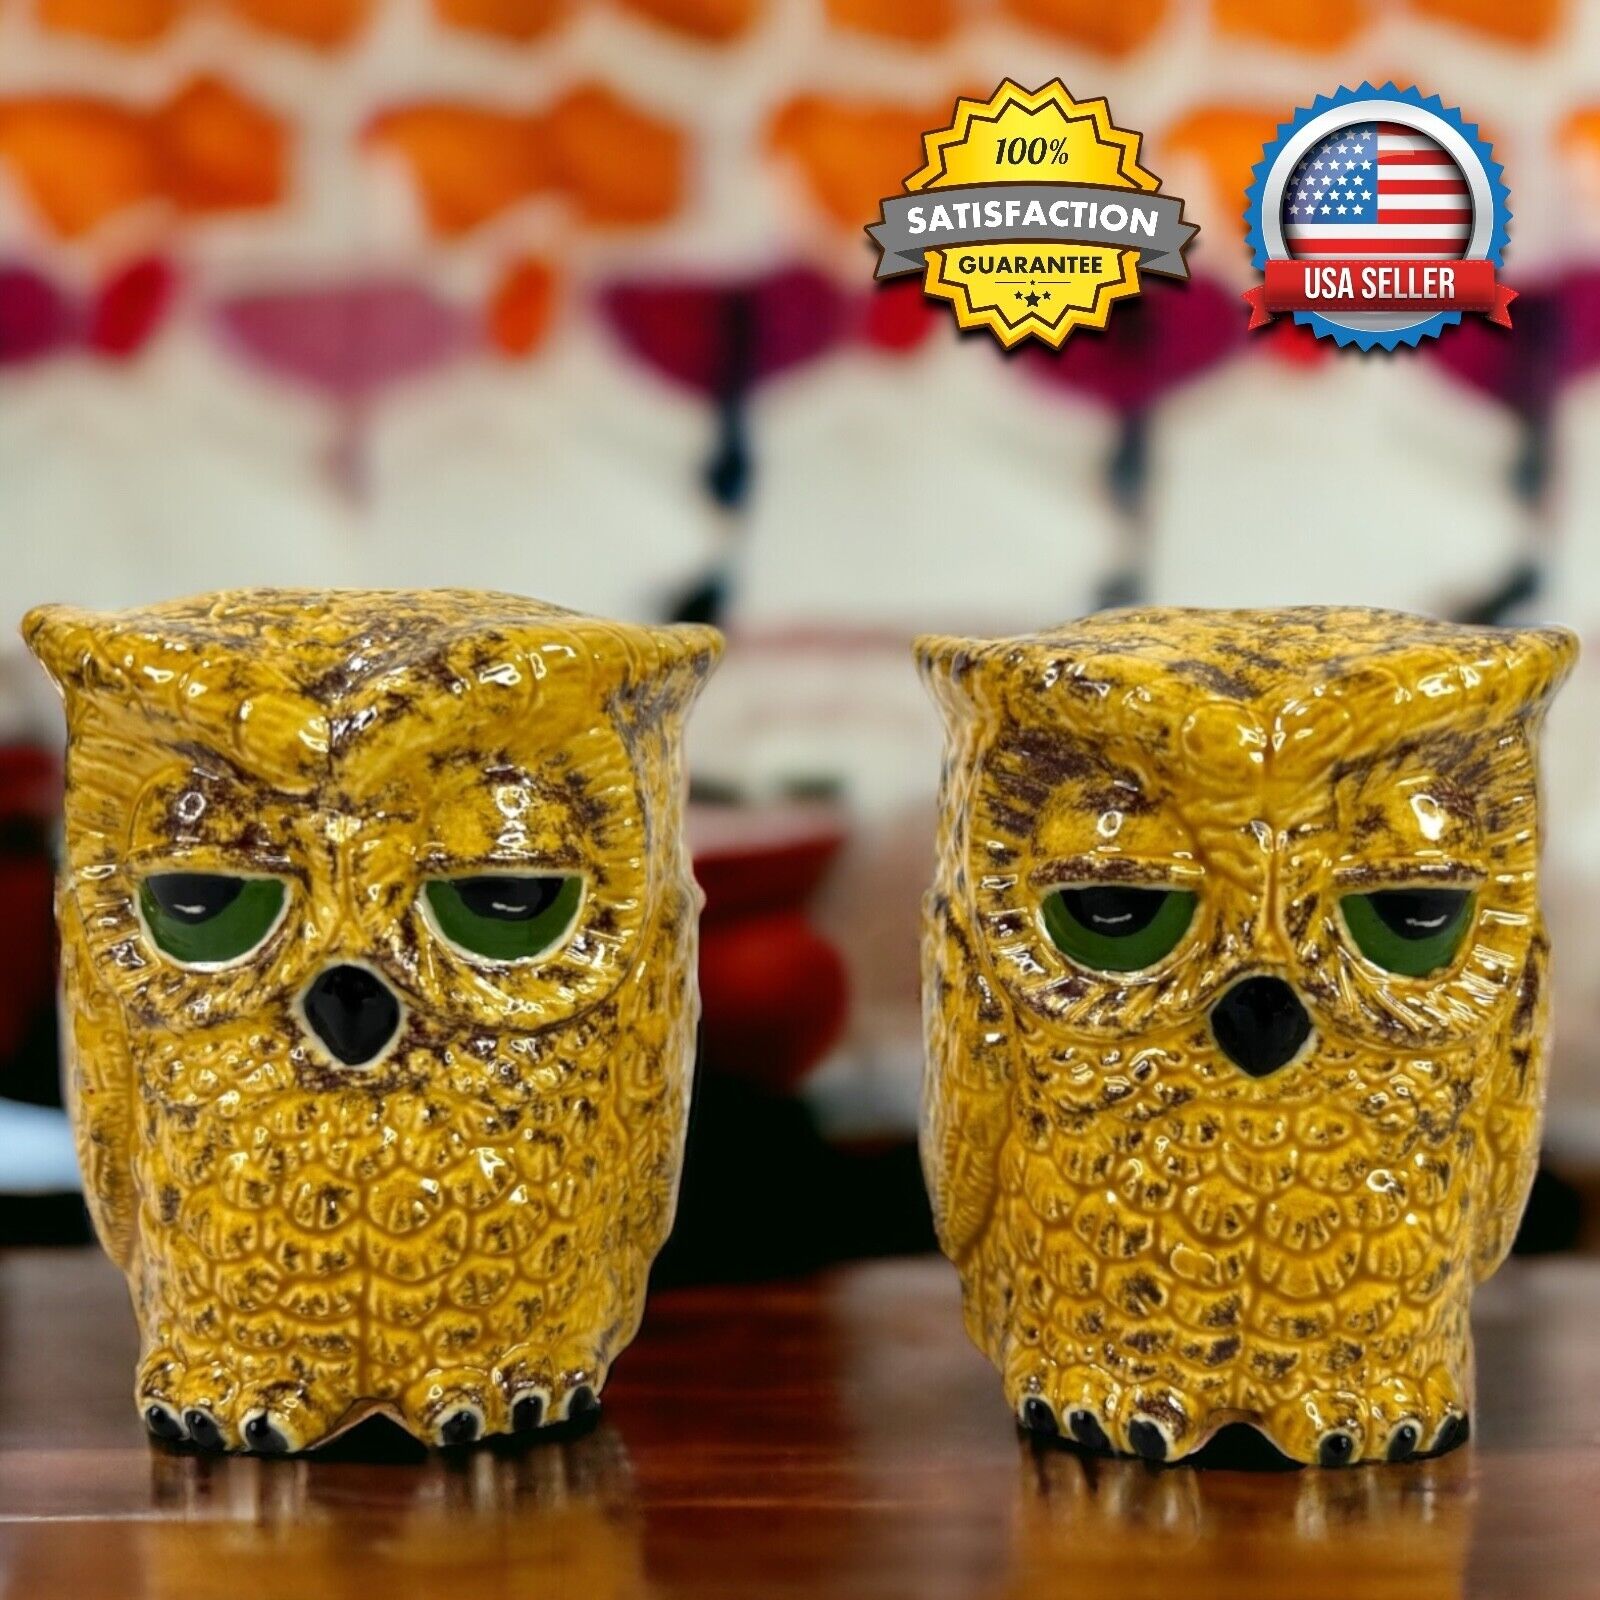 Vintage 1978 Double Sided Owl Sittre Ceramics Mold Salt & Pepper Shakers Kitschy